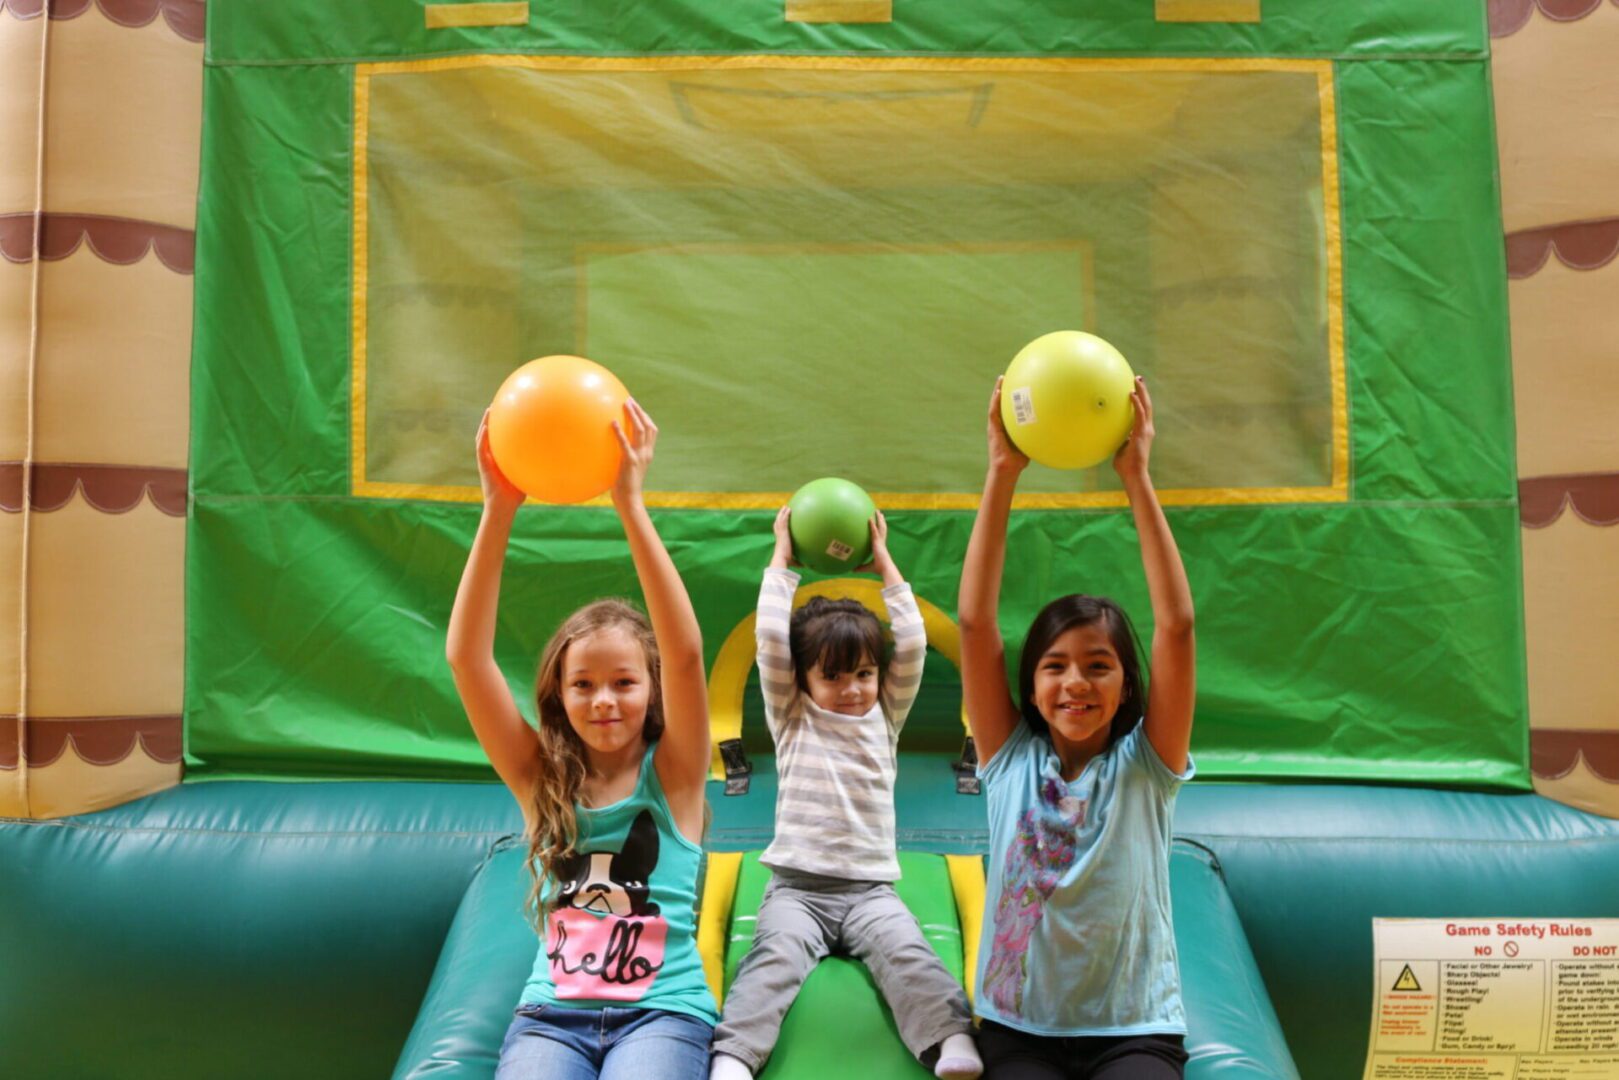 Three children playing in a bounce house with balloons.